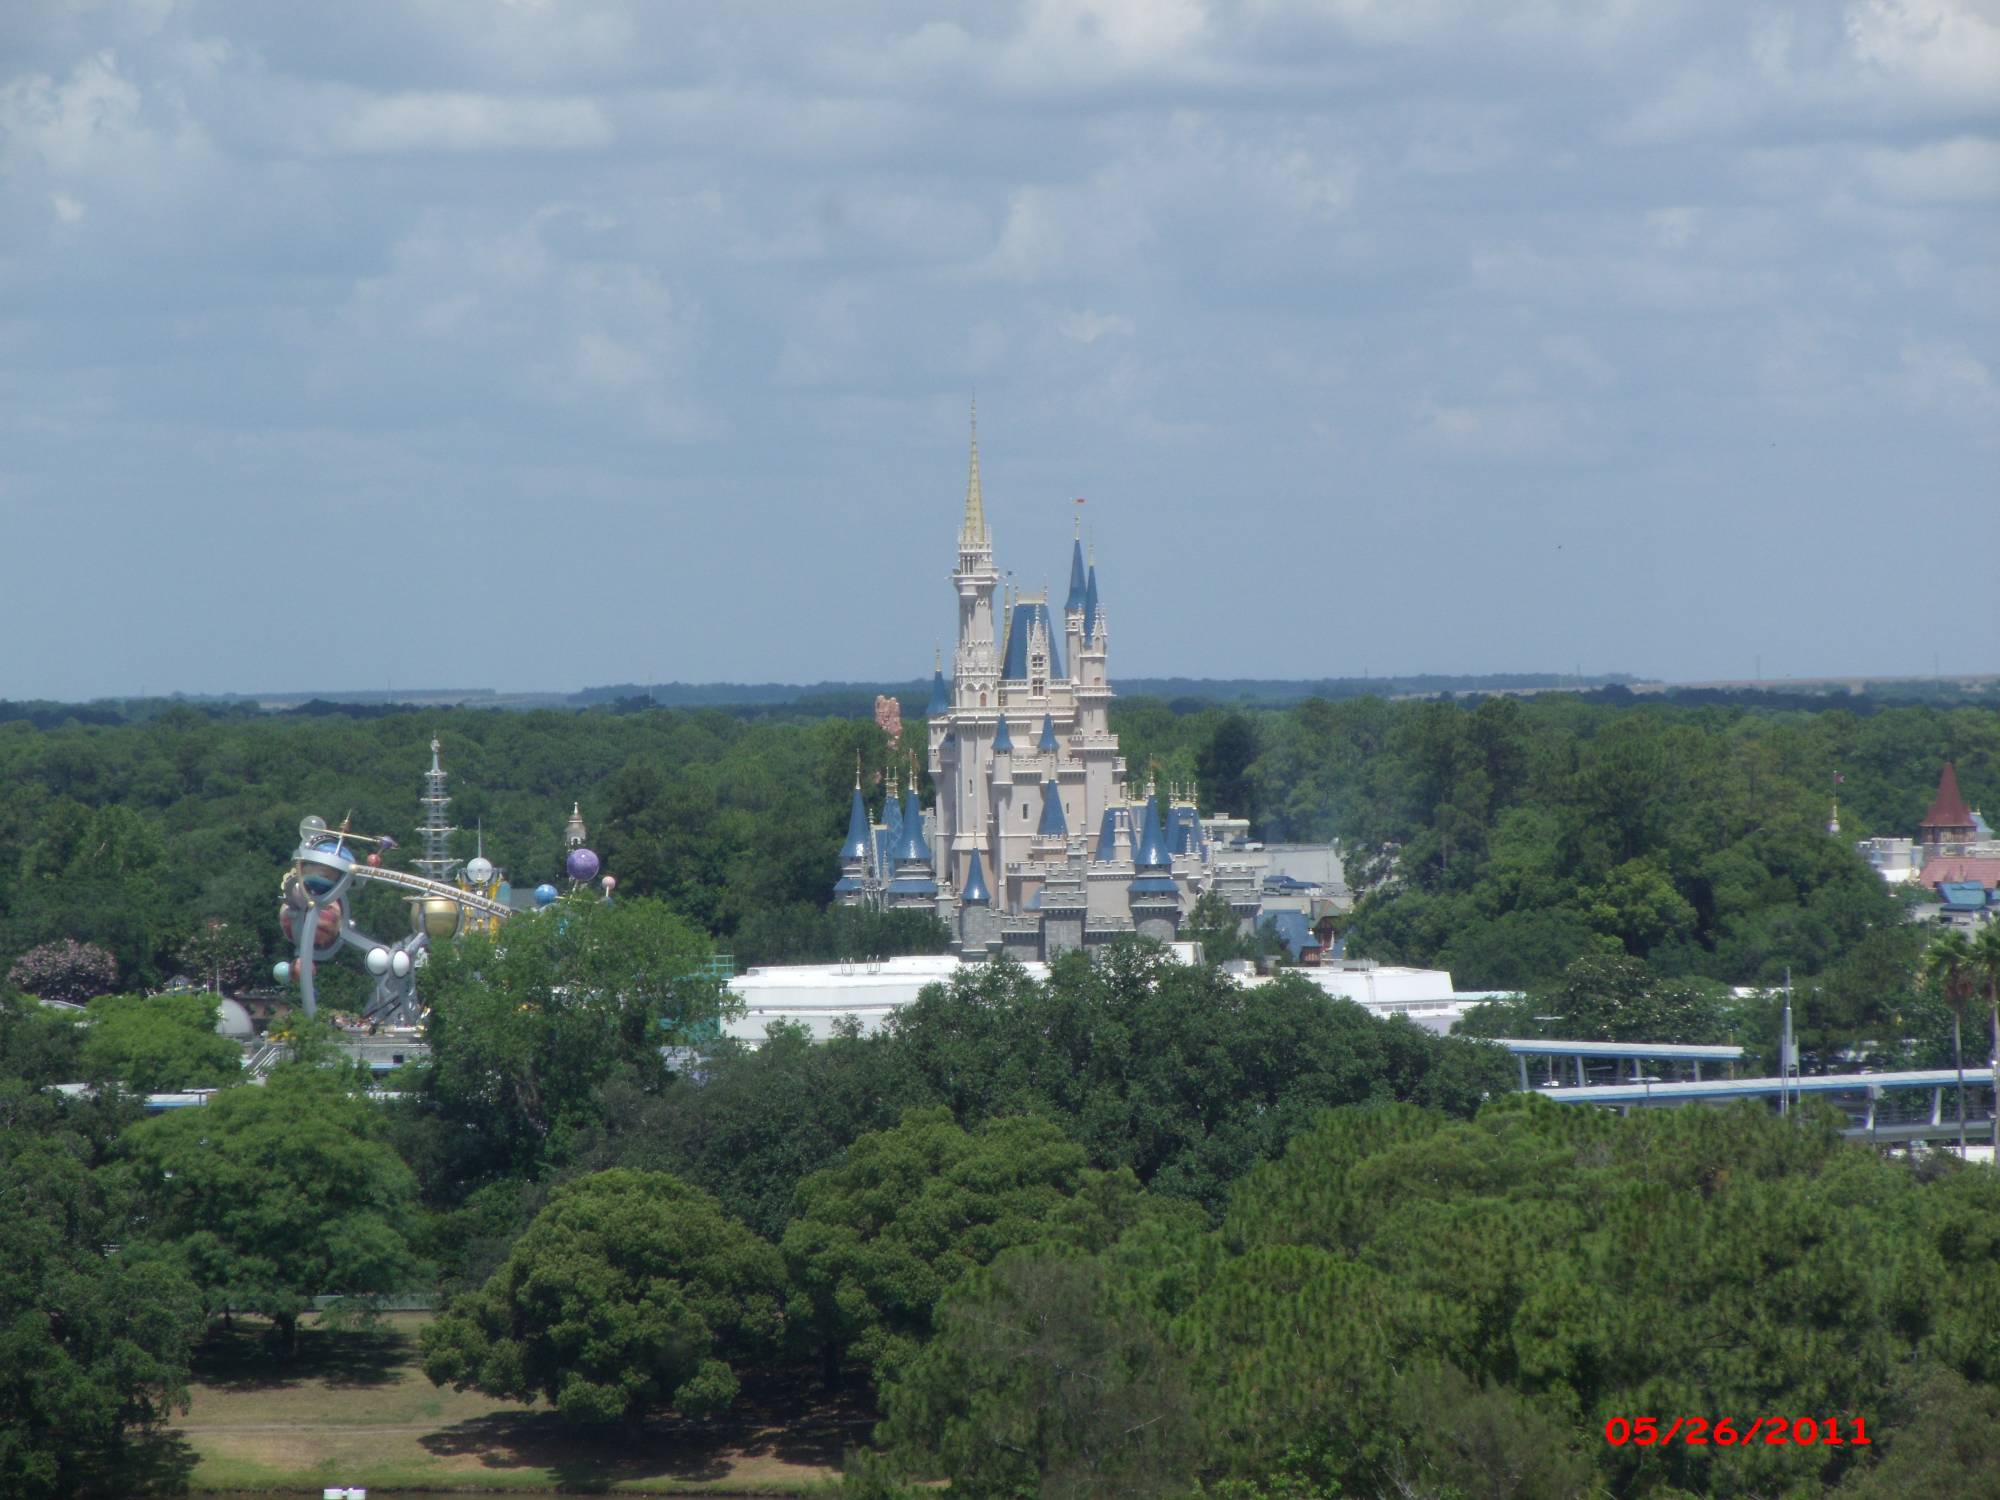 Cinderellas castle from the monorail